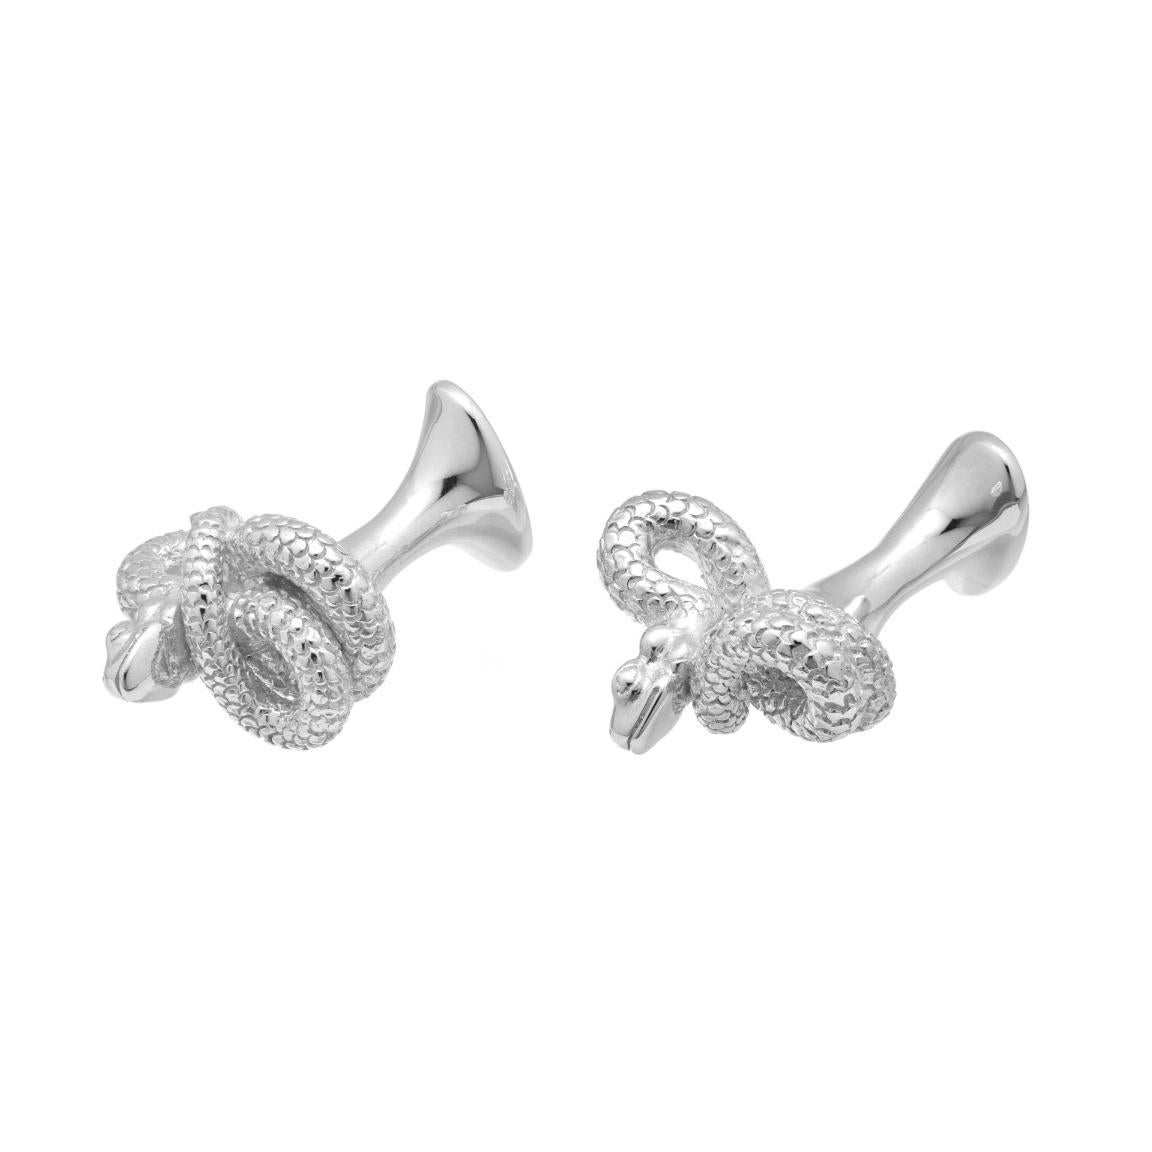 Simon Harrison Chinese Zodiac Sterling Silver Snake Cufflinks In New Condition For Sale In London, GB